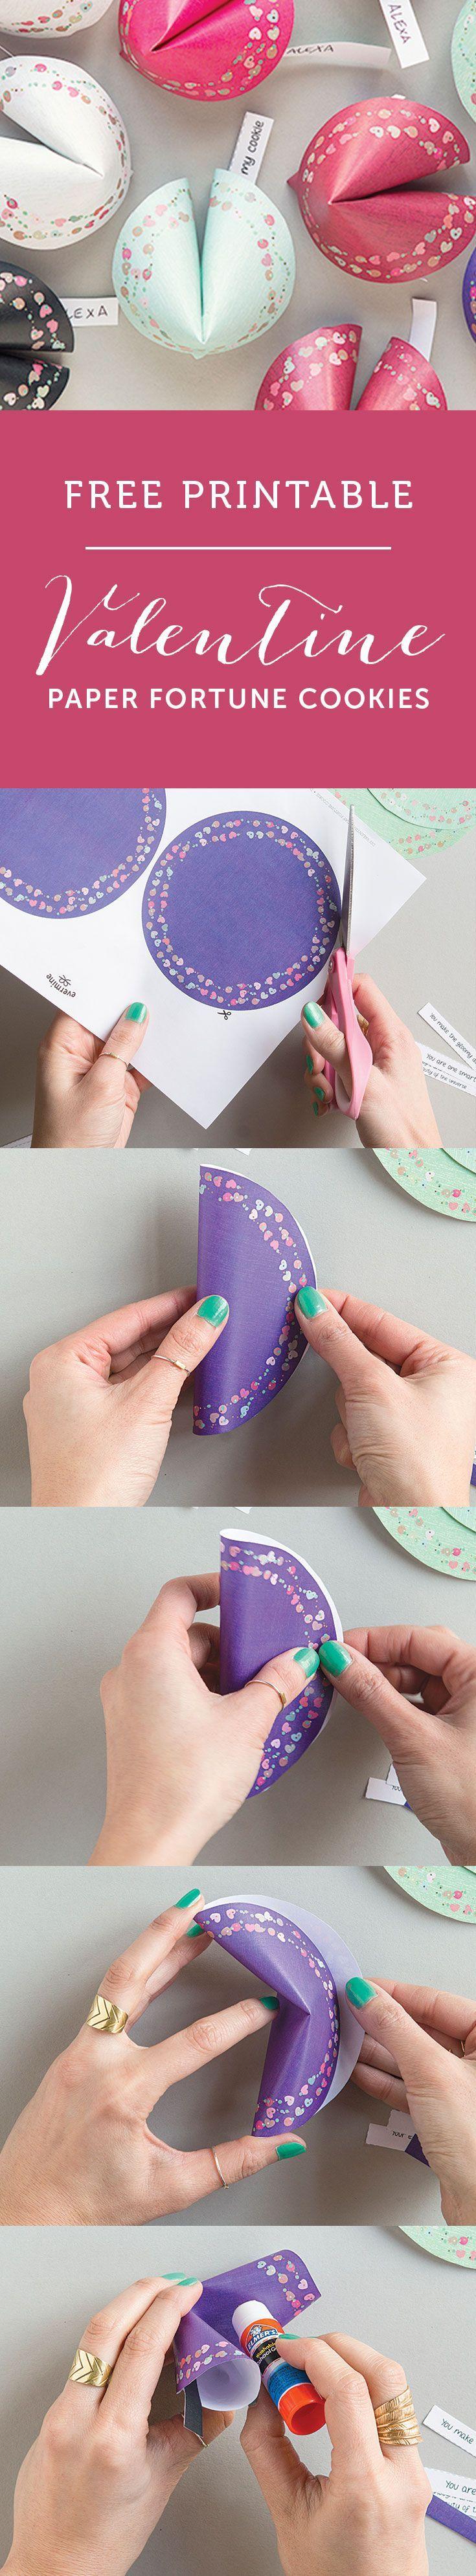 Свадьба - Free Printable Valentine Paper Fortune Cookies - Gift & Favor Ideas From Evermine